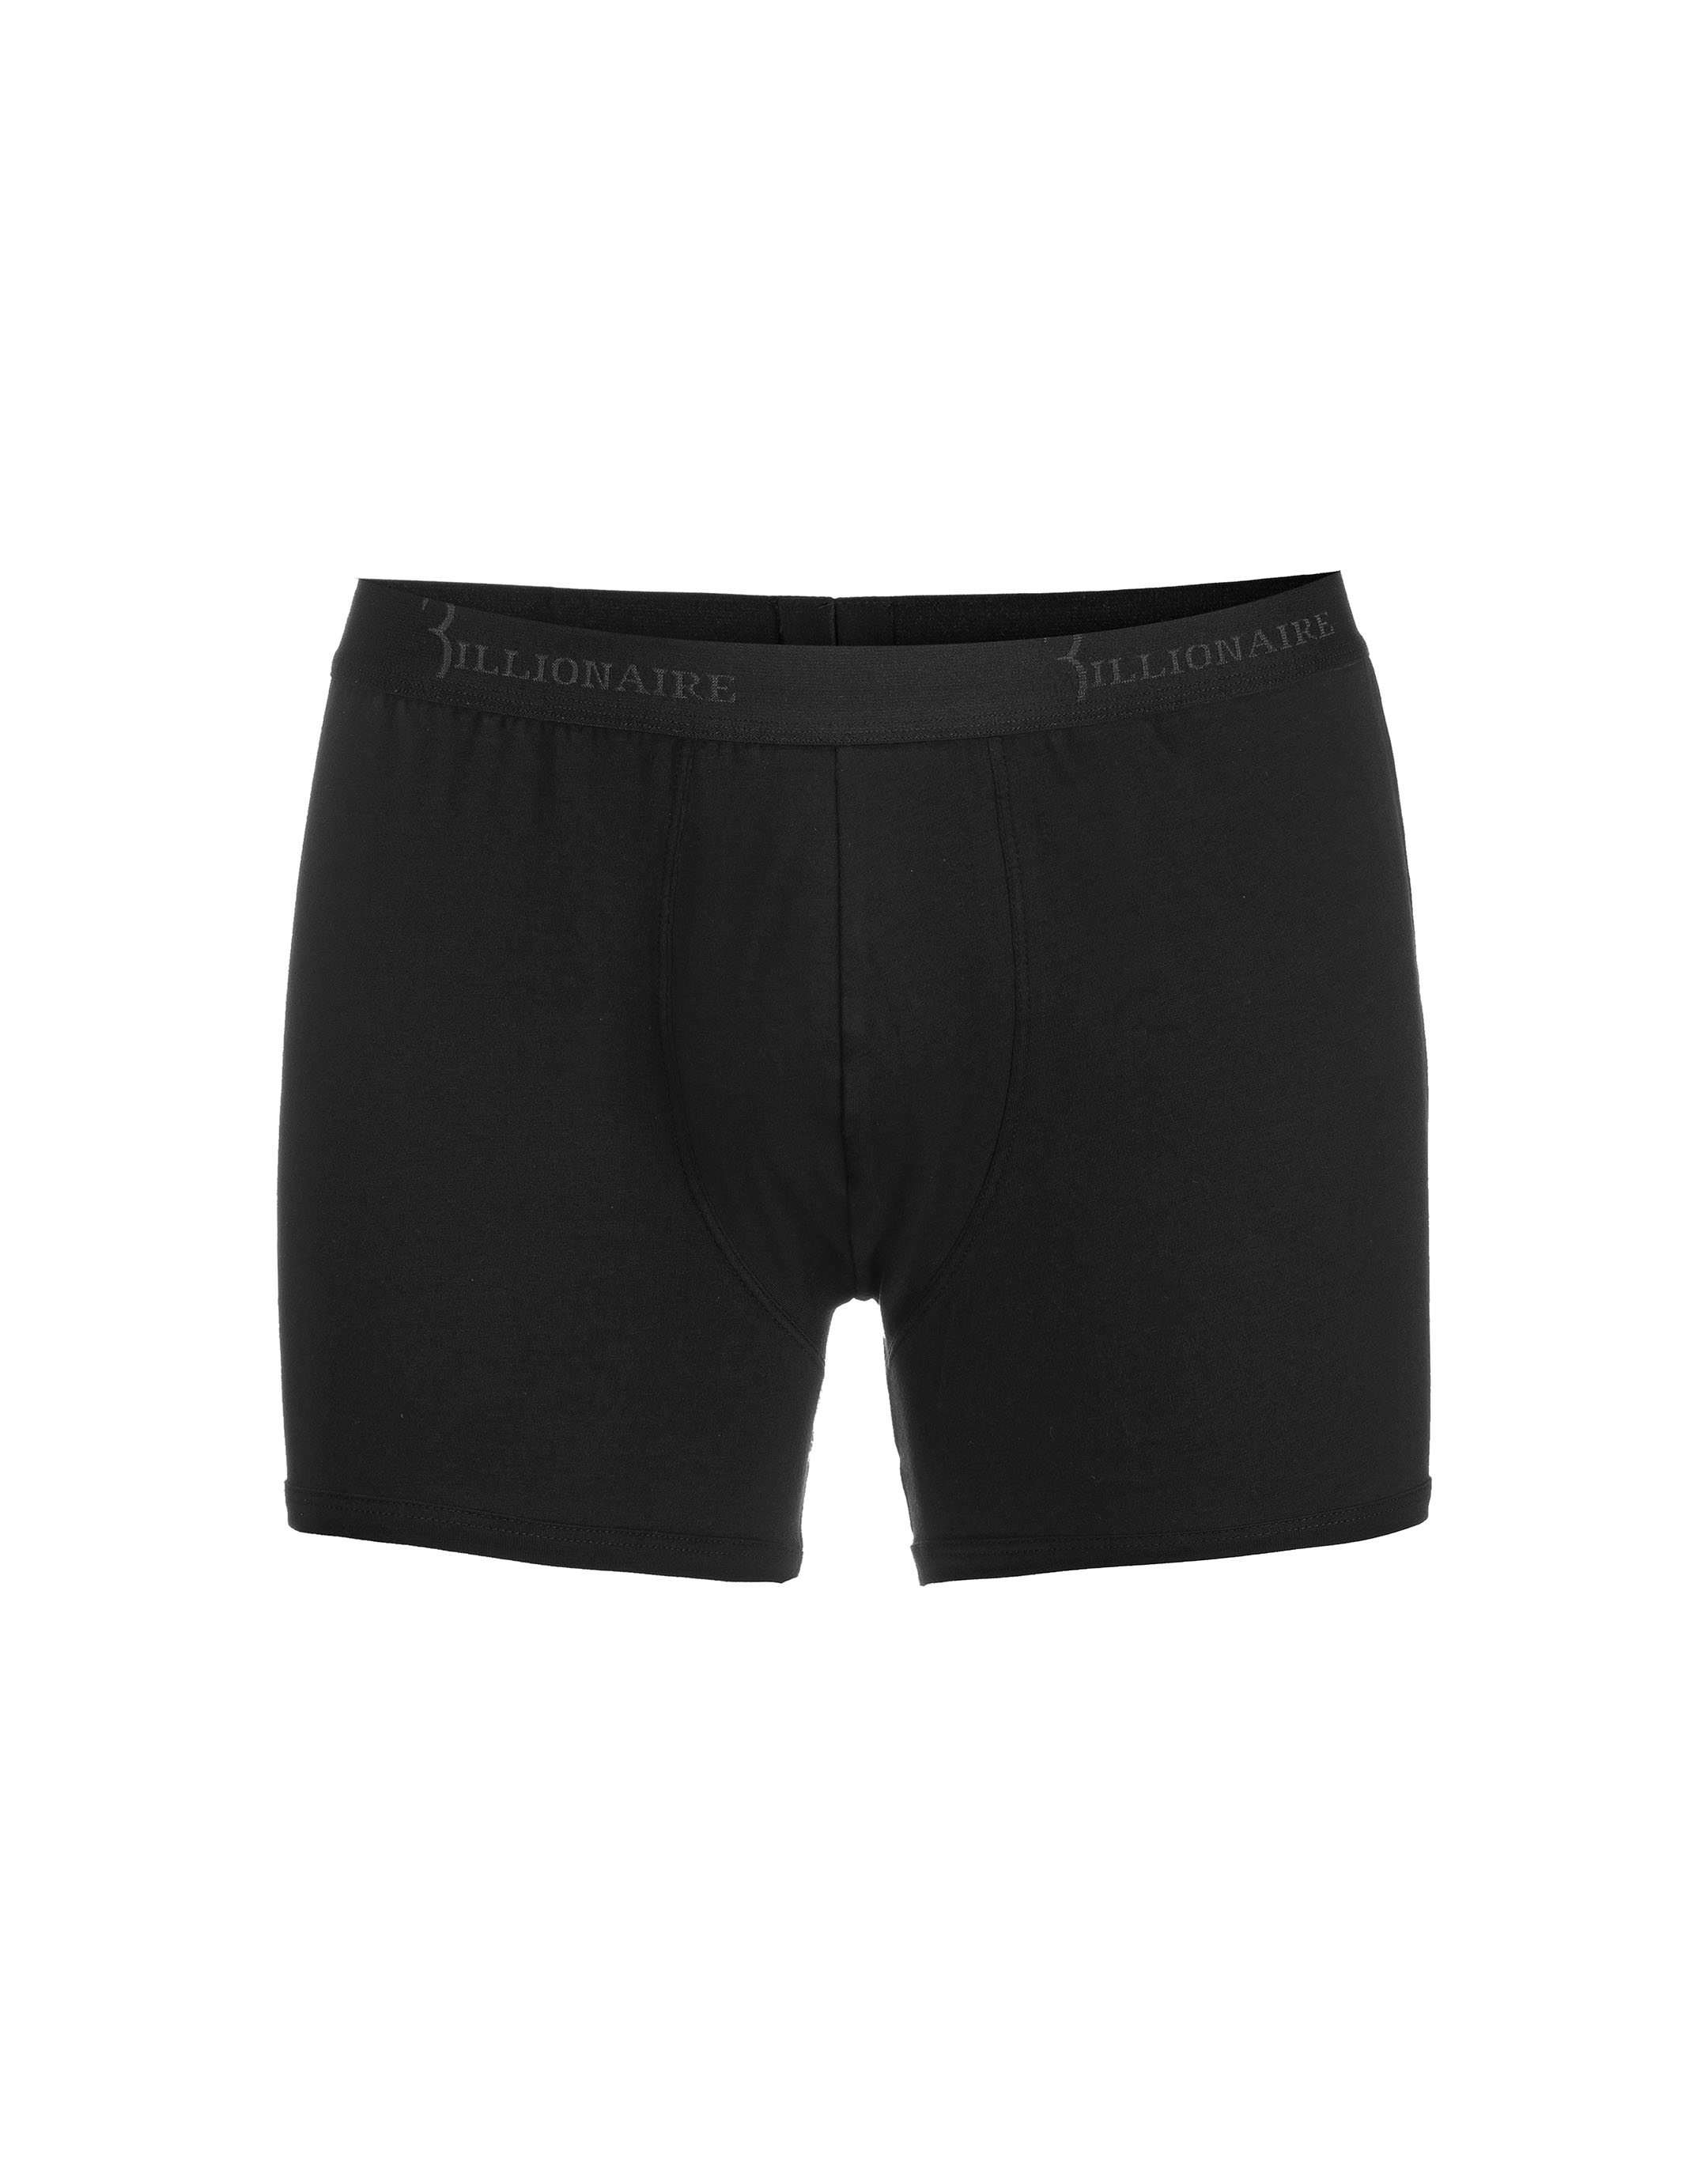 Black Friday Boxer Shorts Top Sellers, UP TO 66% OFF |  www.editorialelpirata.com